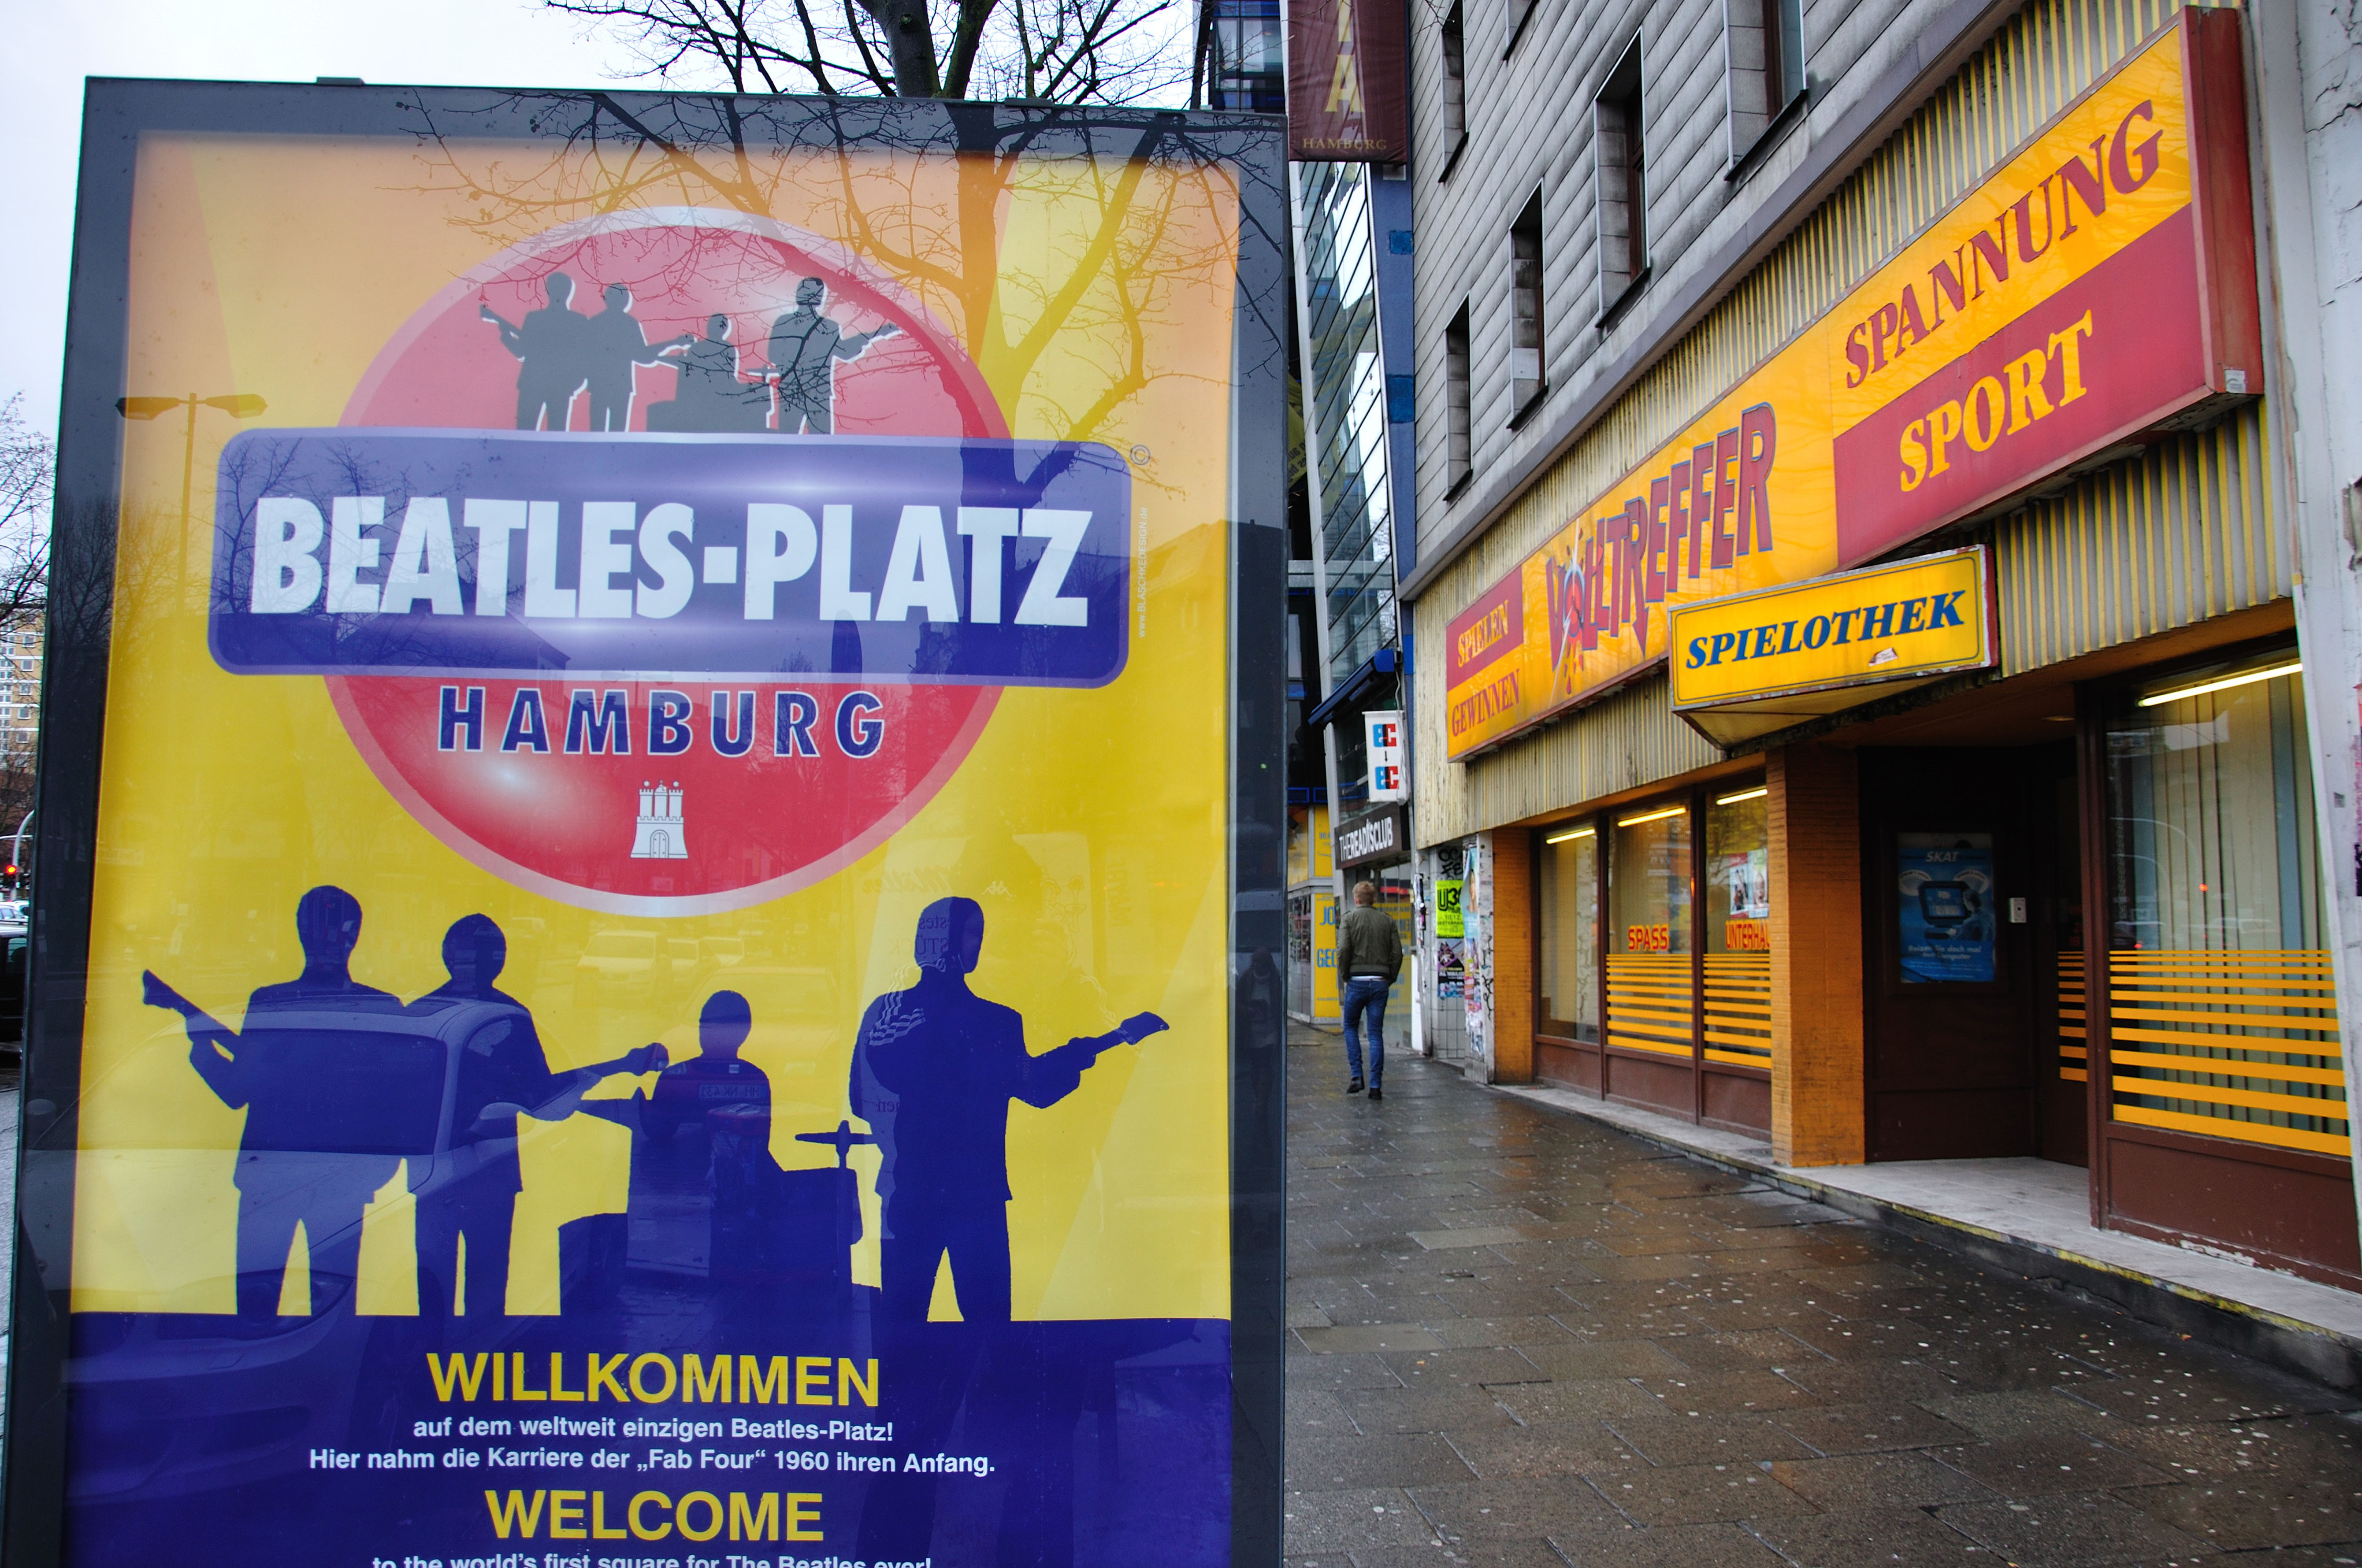 The Beatles-Platz is a tribute to the band in the St Pauli quarter of Hamburg